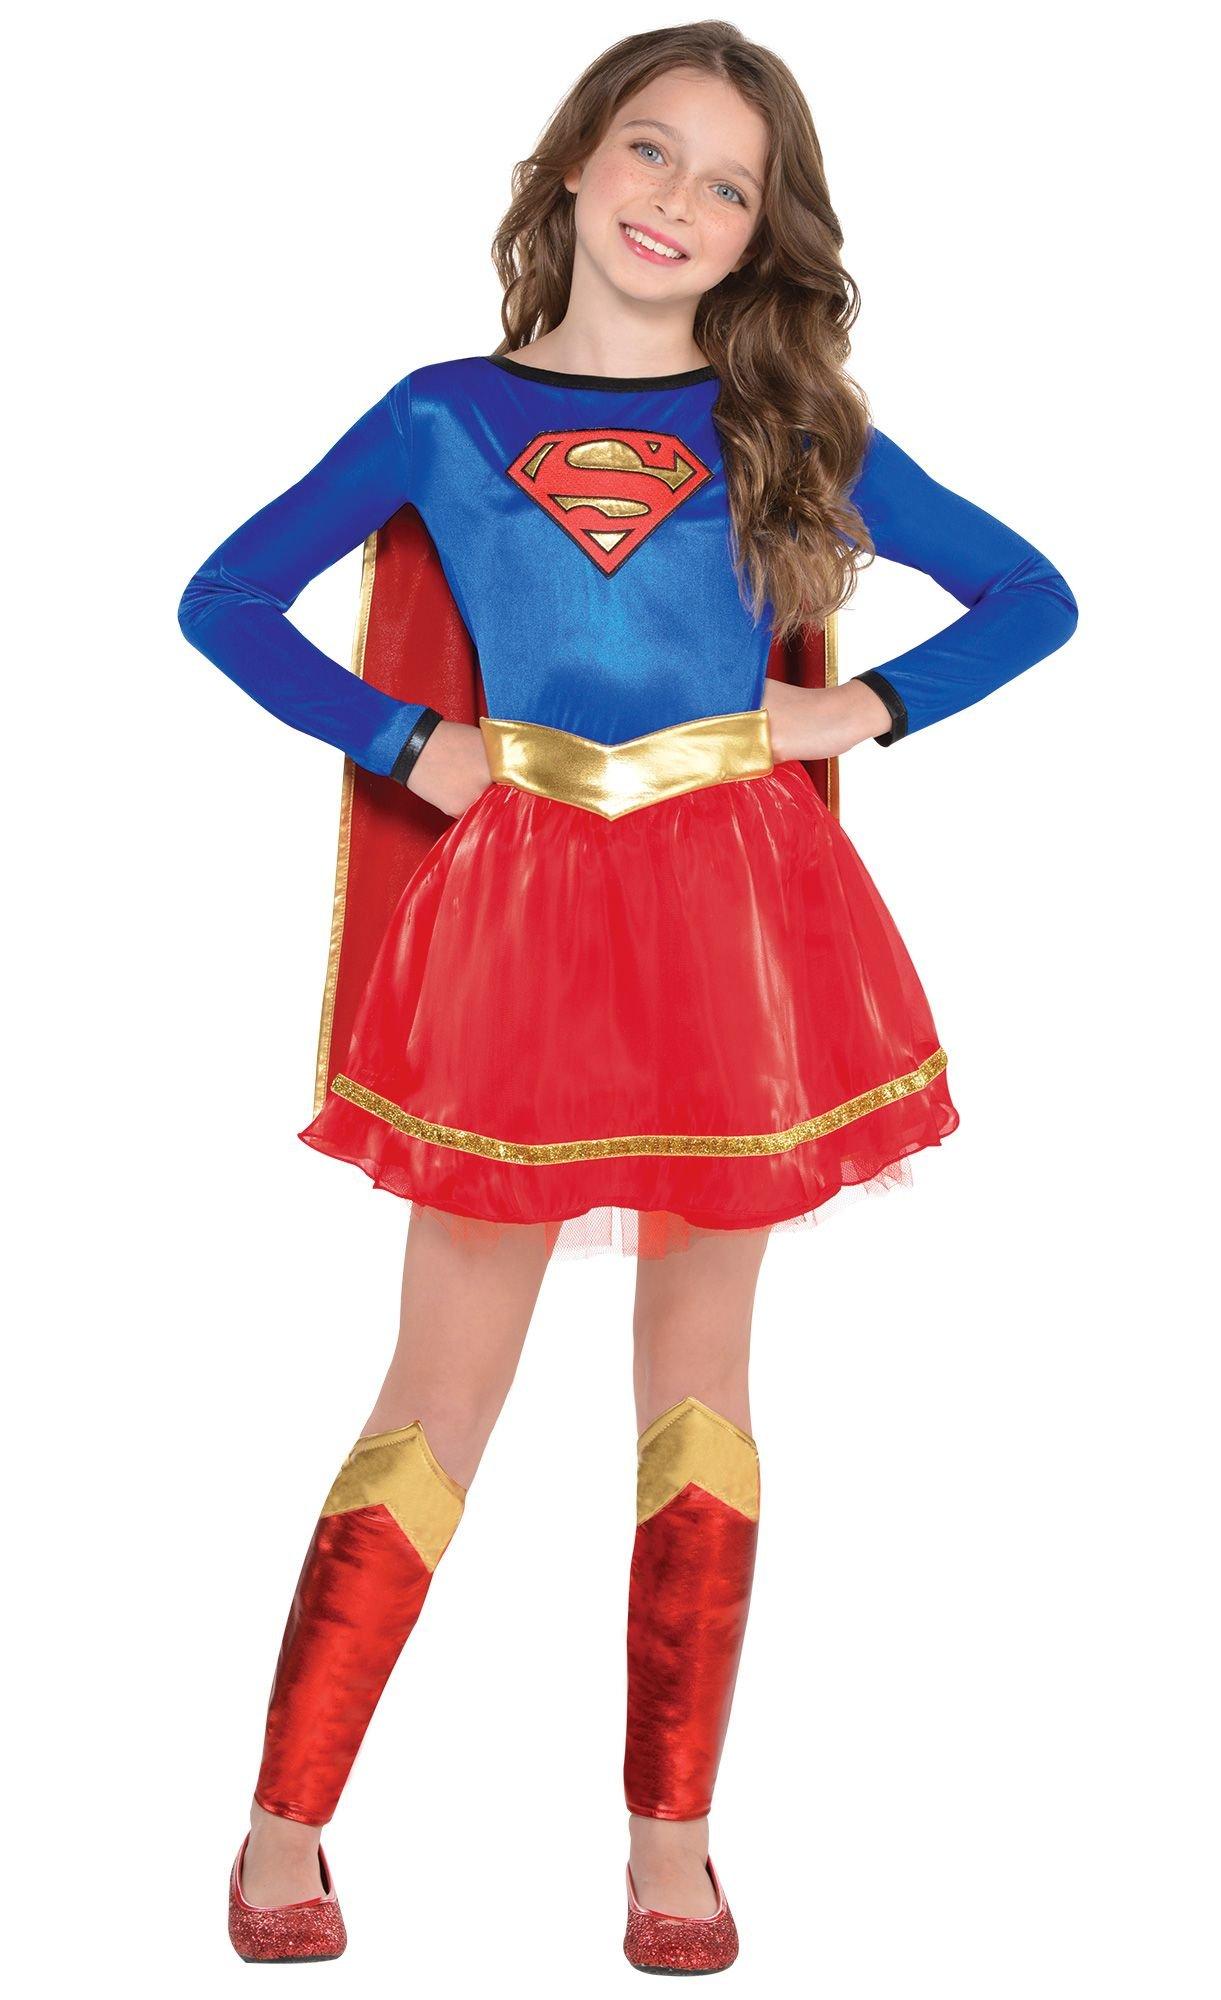 Girls Supergirl Costume - Superman | Party City